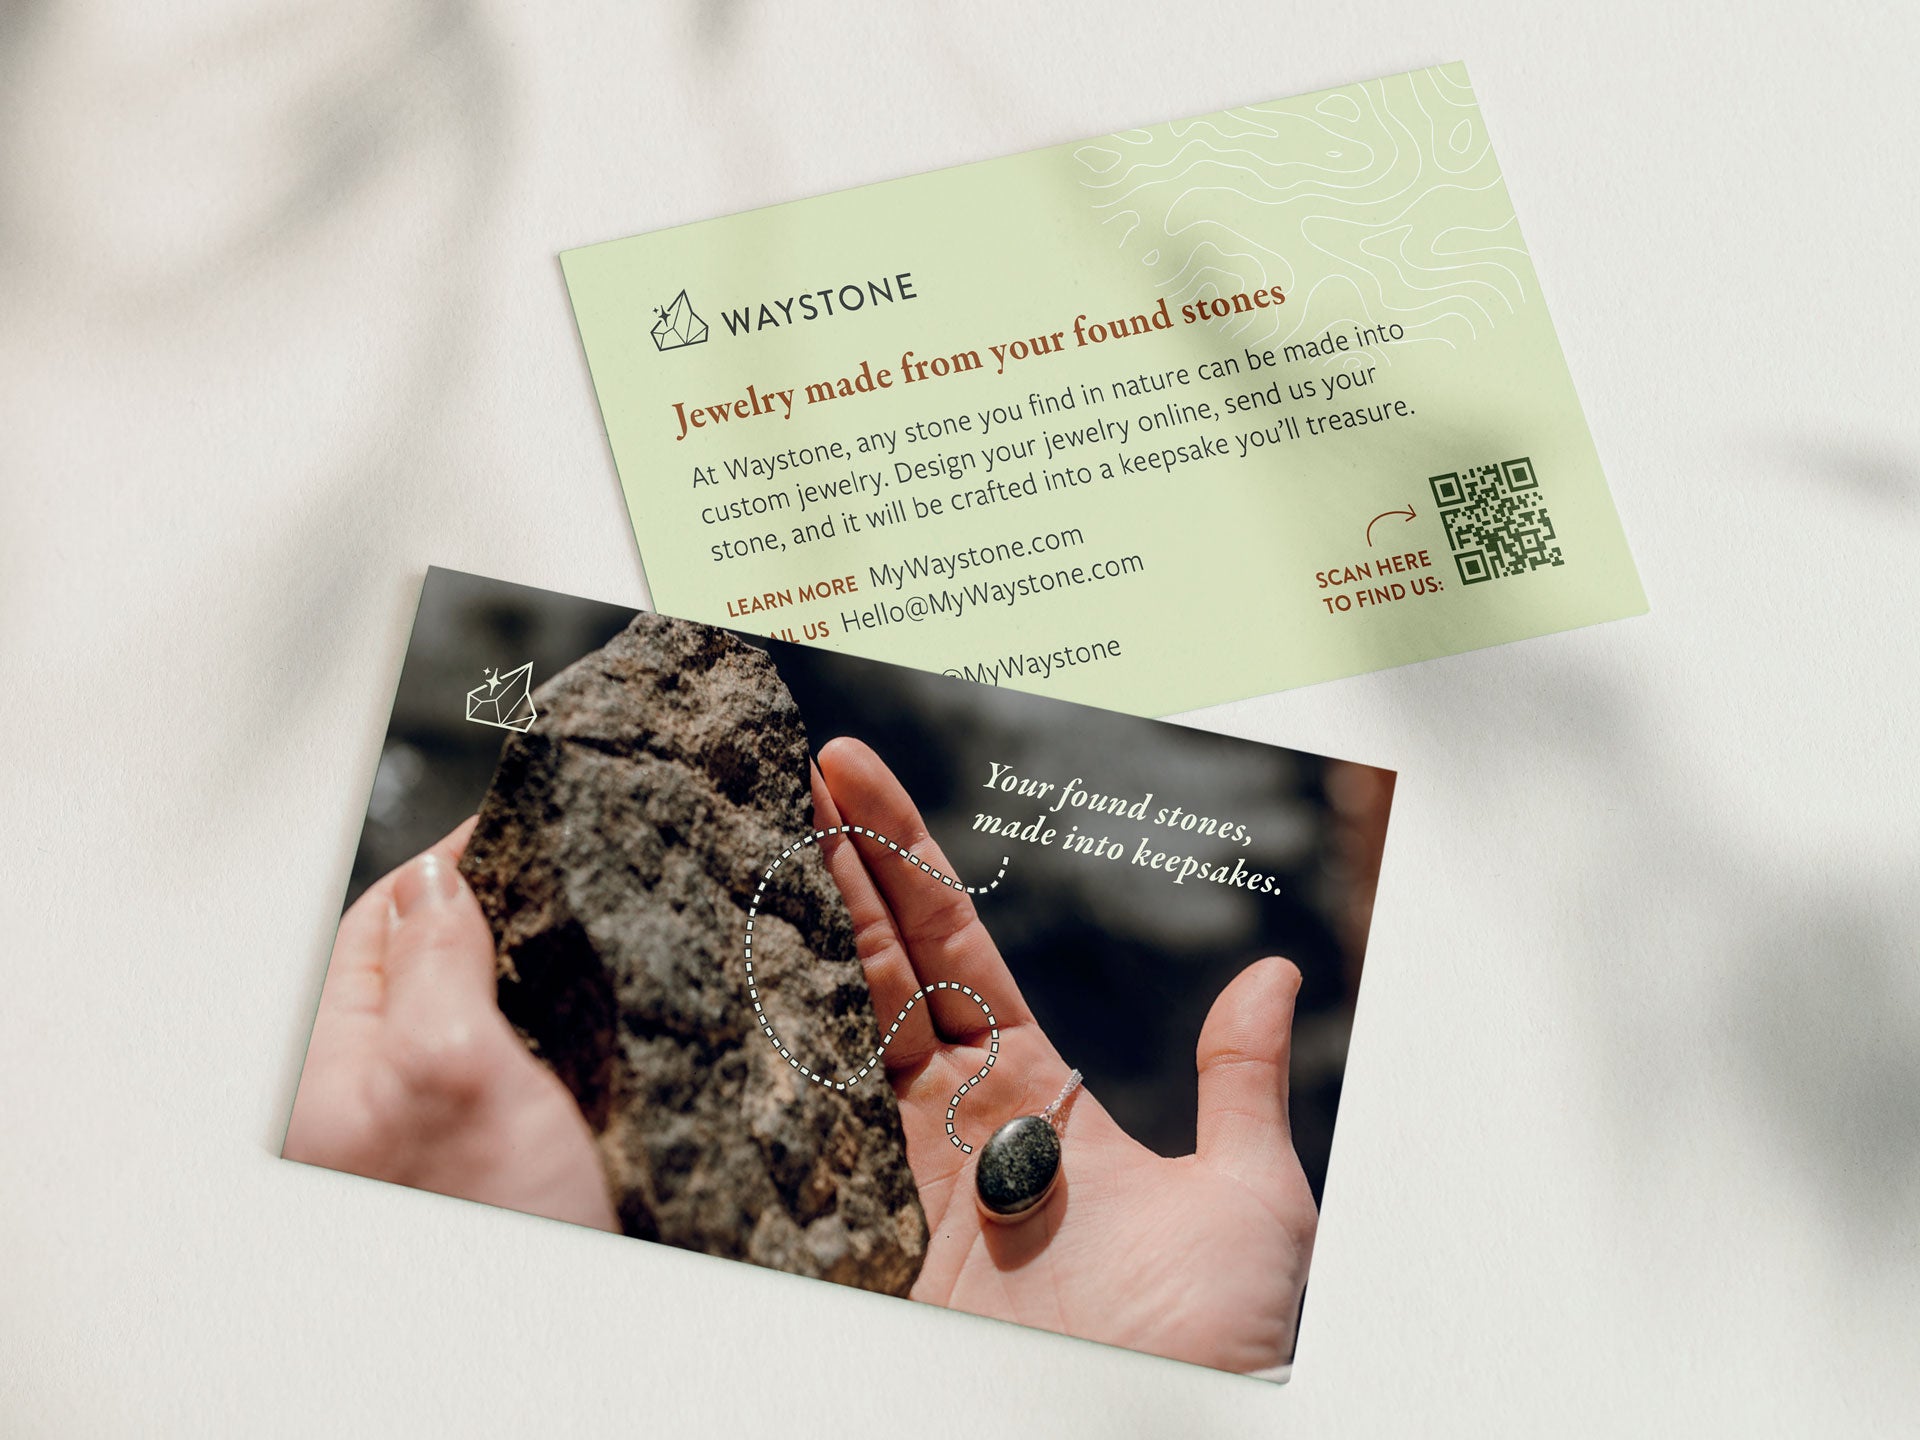 A business card design for Waystone that reads, "Jewelry made from your found stones."